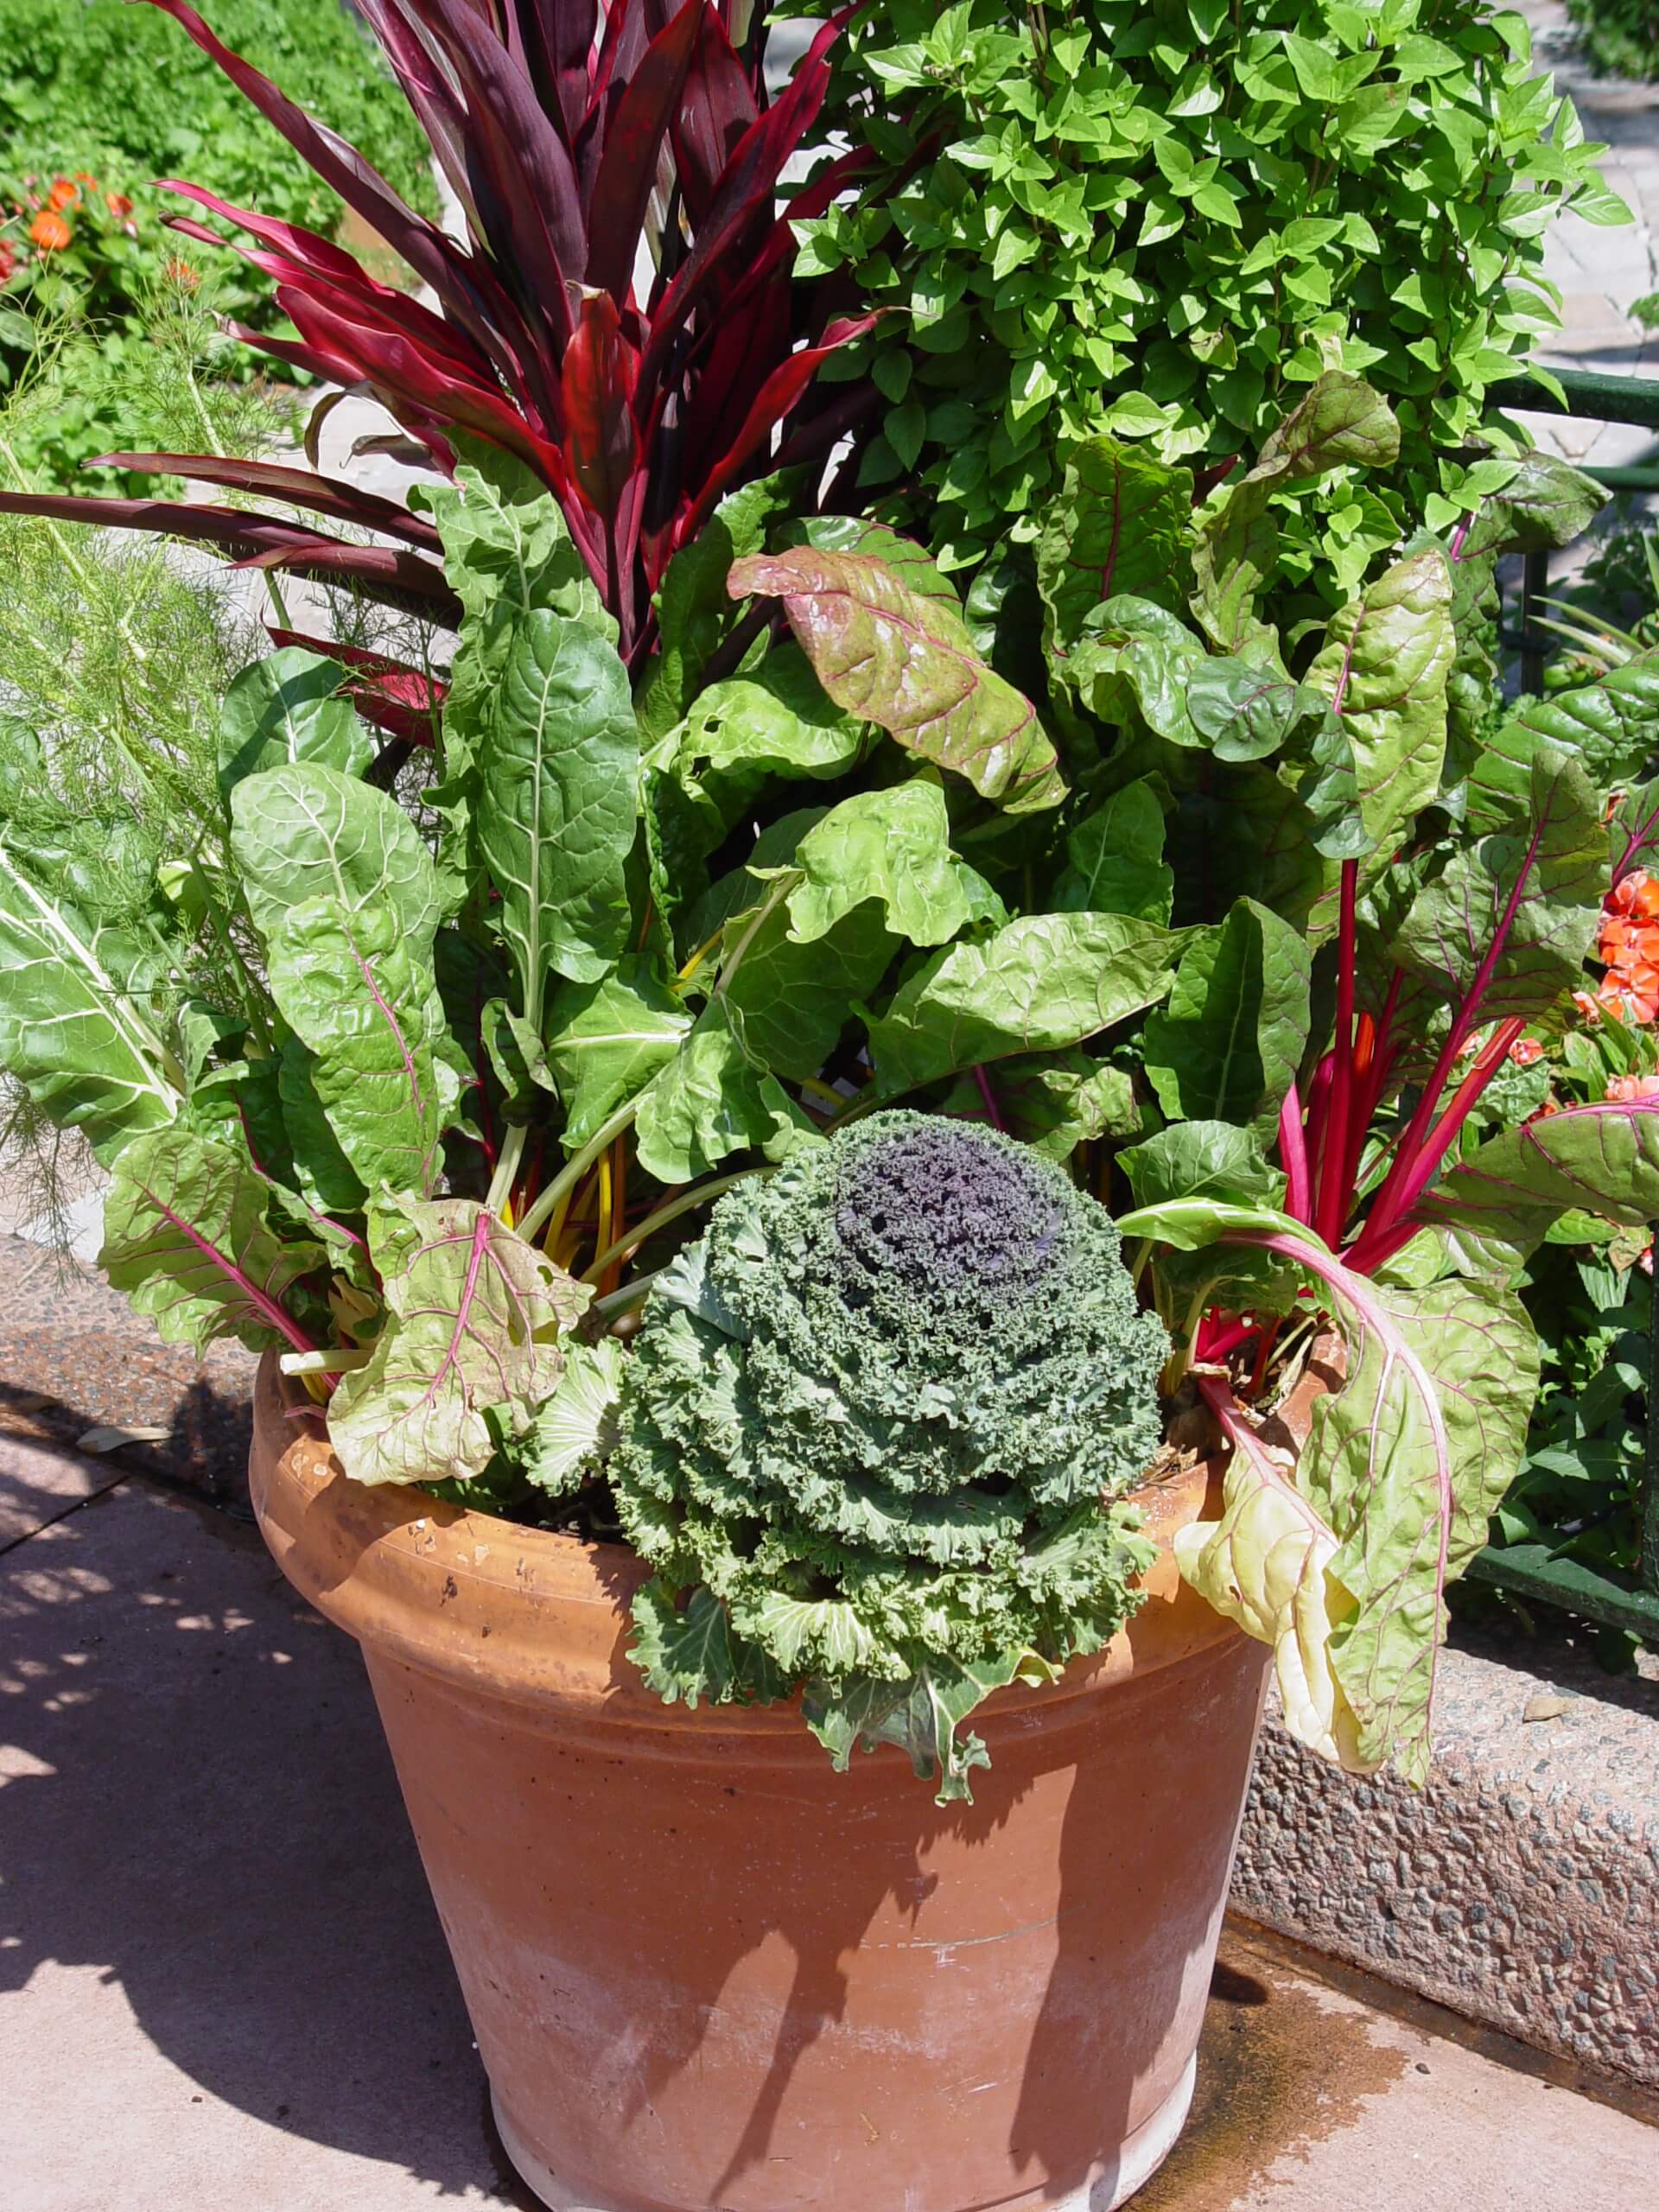 Large pots on a sunny porch or patio can be packed with greens for easy picking.